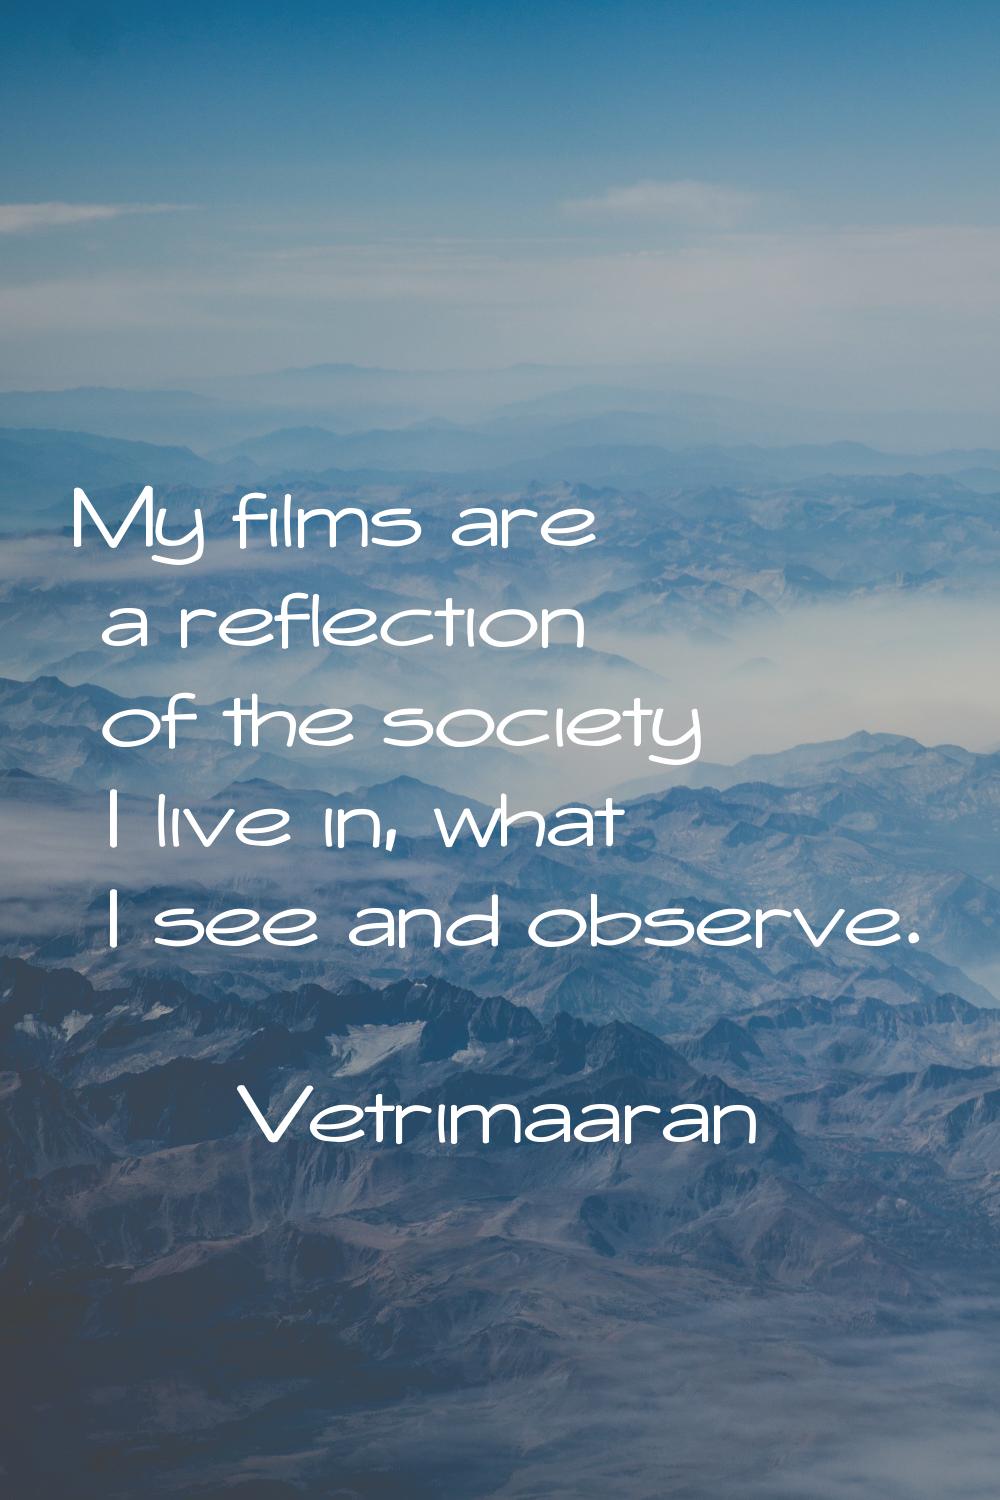 My films are a reflection of the society I live in, what I see and observe.